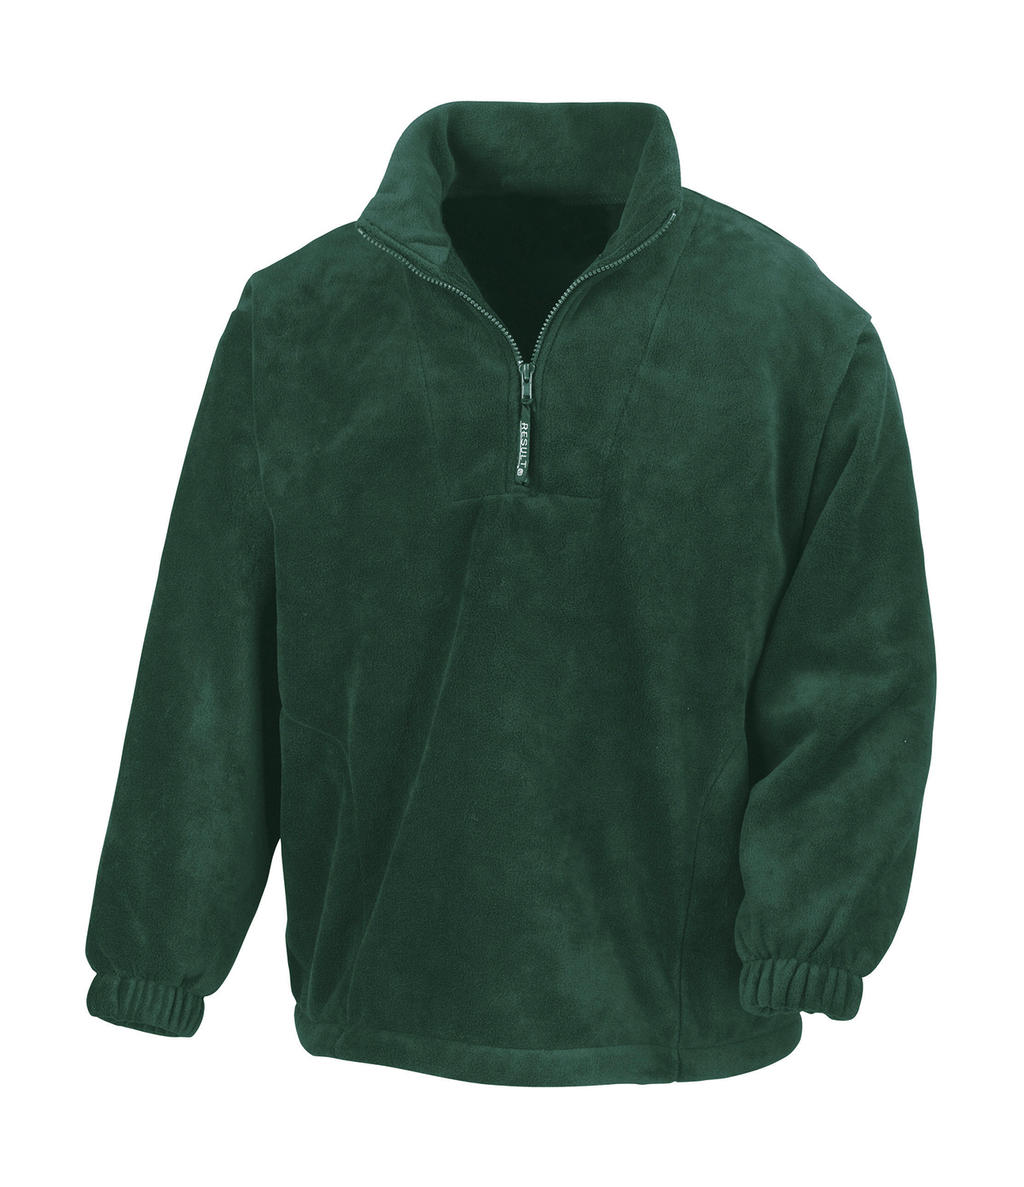  Polartherm? Top in Farbe Forest Green